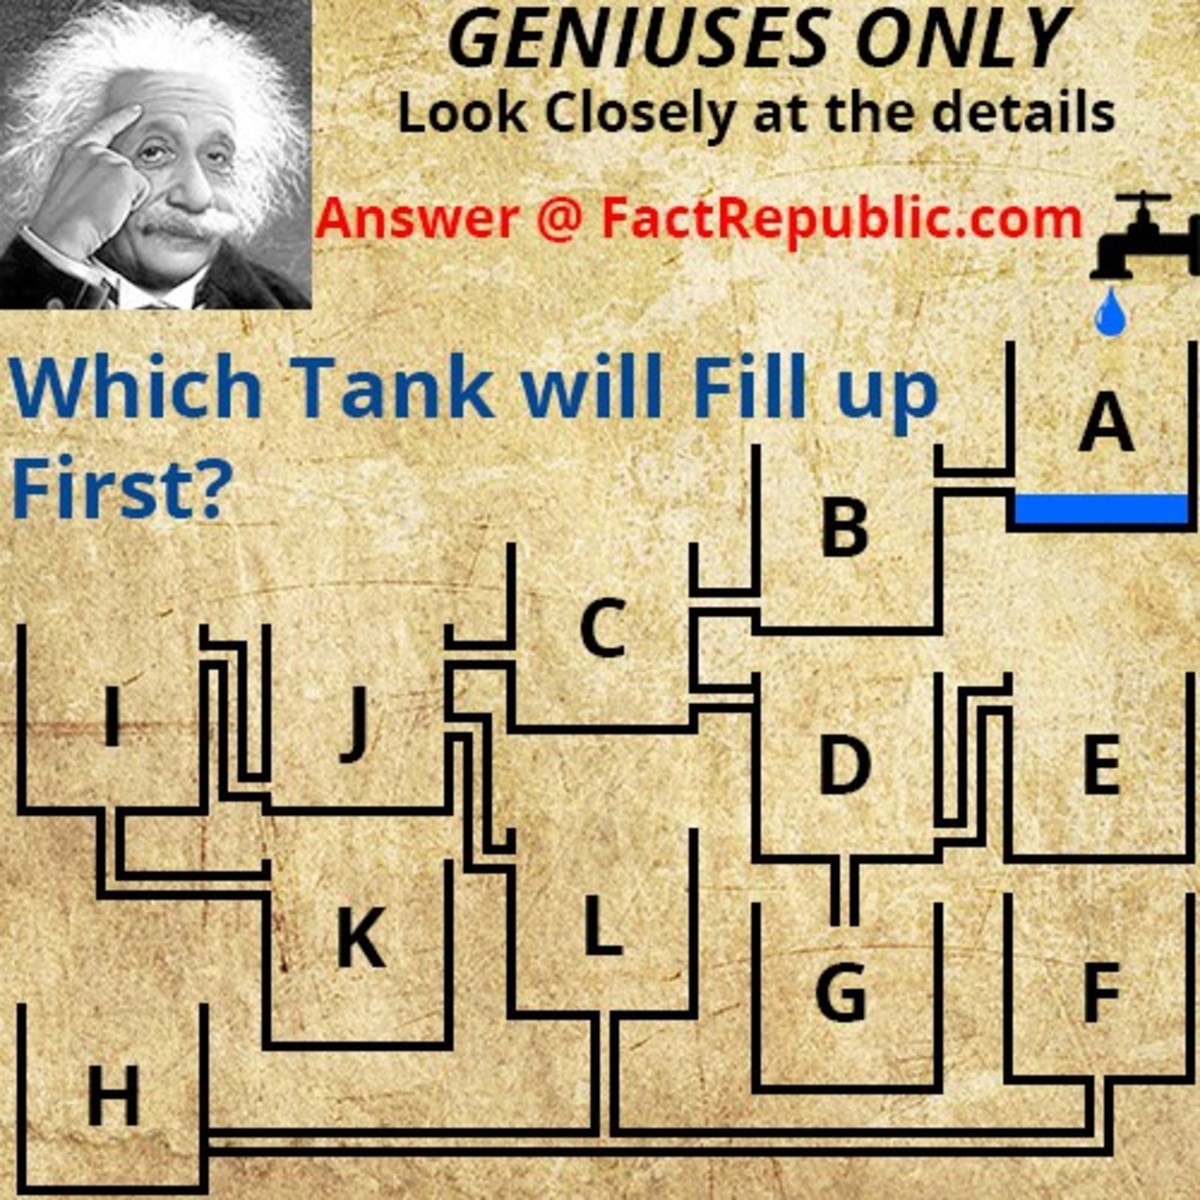 Which+tank+will+fill+up+first+check+the+answer+at_8193ce_6349645.jpg